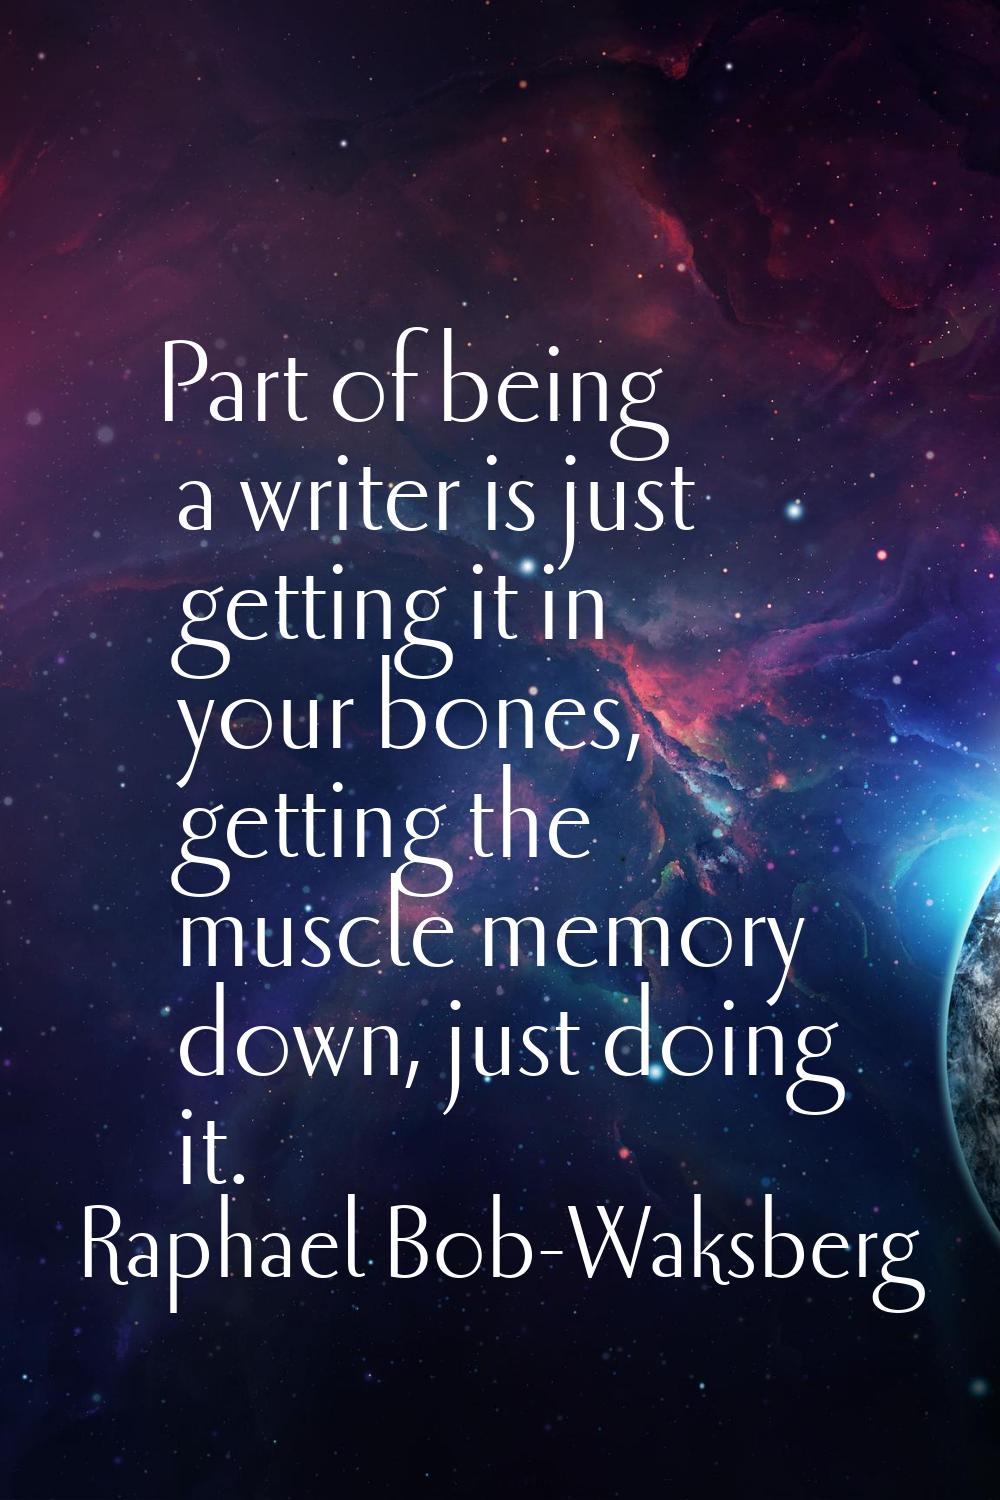 Part of being a writer is just getting it in your bones, getting the muscle memory down, just doing